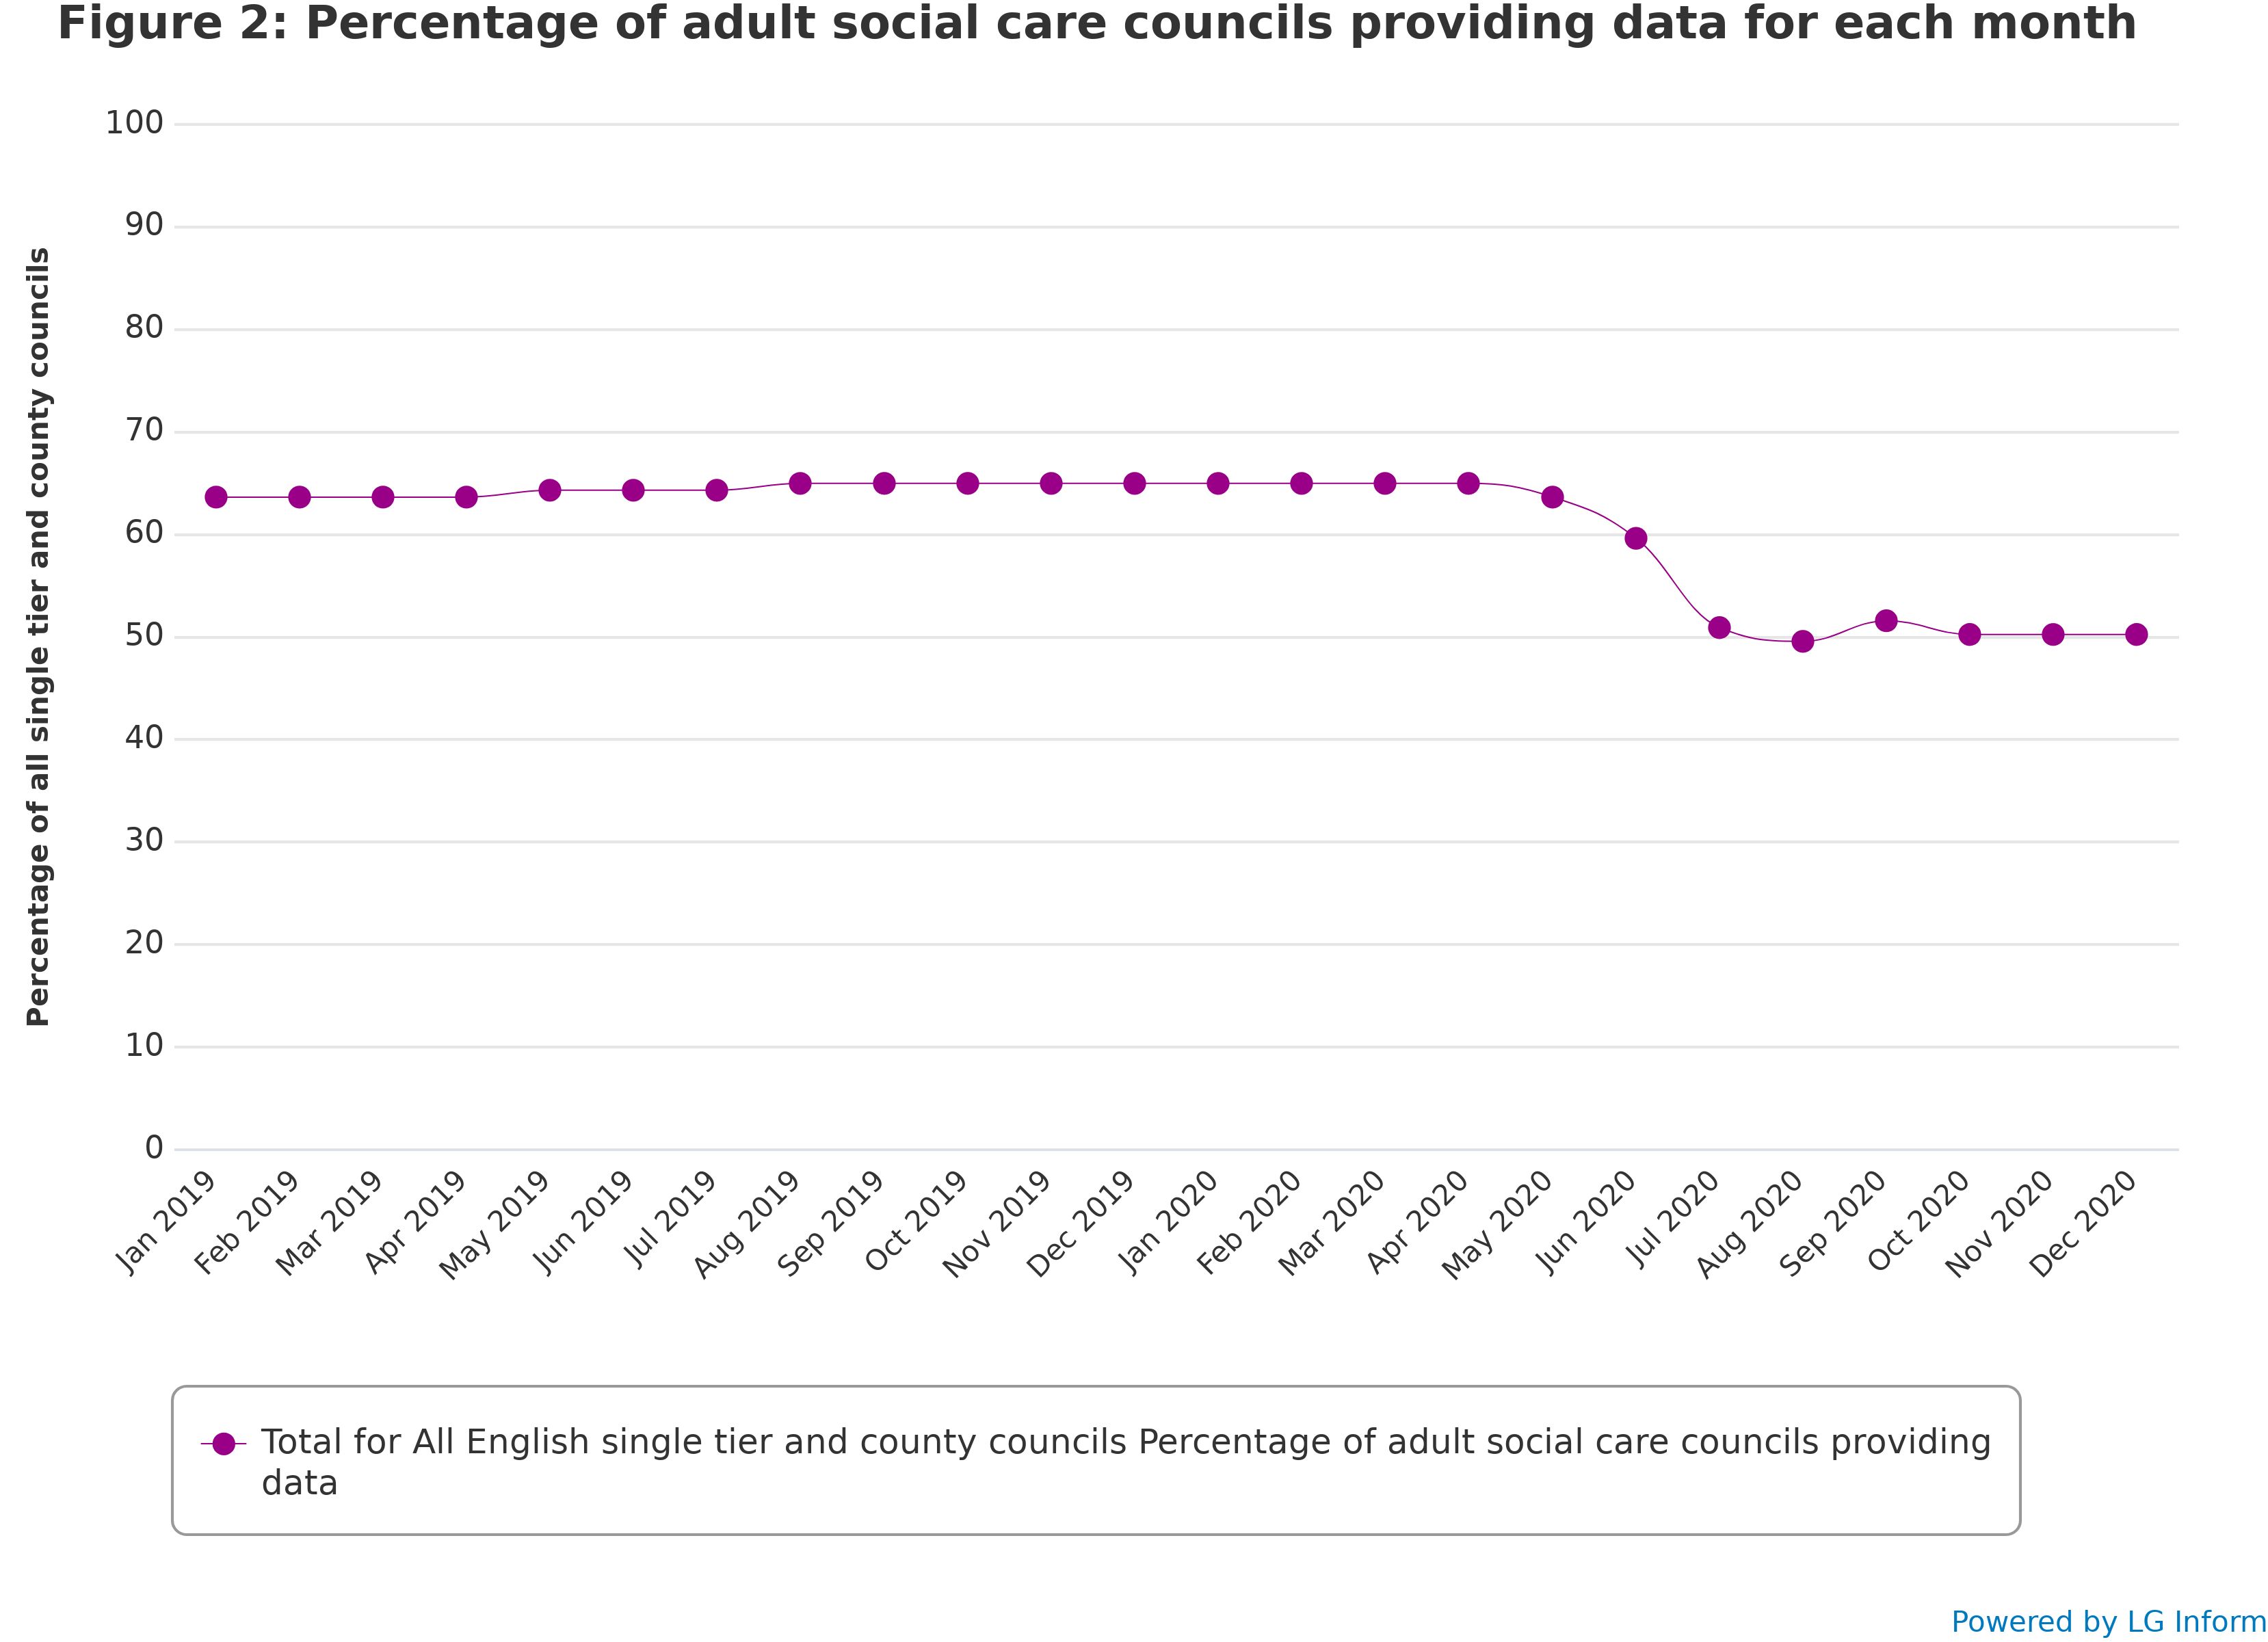 Figure 2: Percentage of adult social care councils providing data for each month